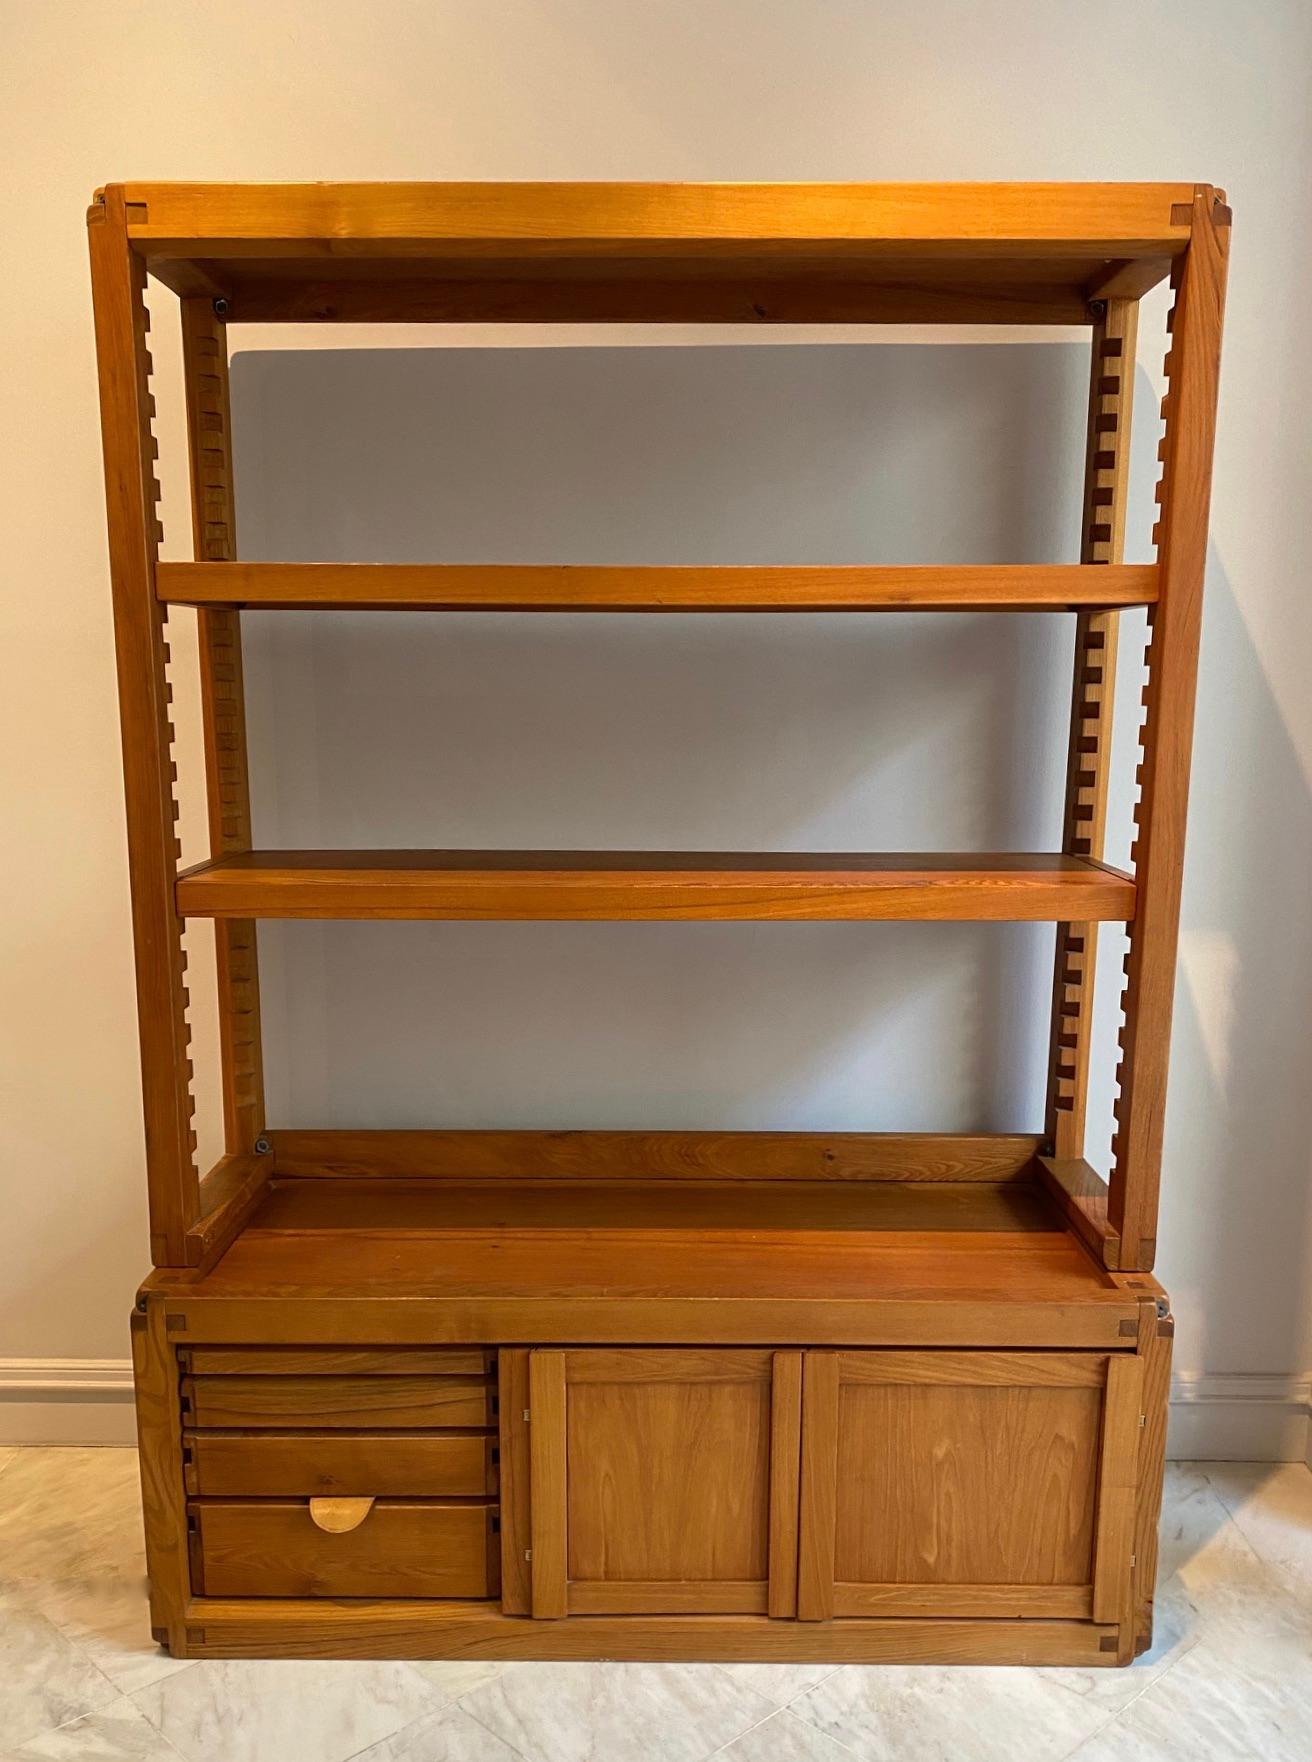 1960s solid elm French modern adjustable book- or showcase, reference B10 by Pierre Chapo.
Extremely well crafted (Shelves and cabinet can be separated).
The piece is equipped with 4 drawers and 3 shelves that you can adjust to your personal